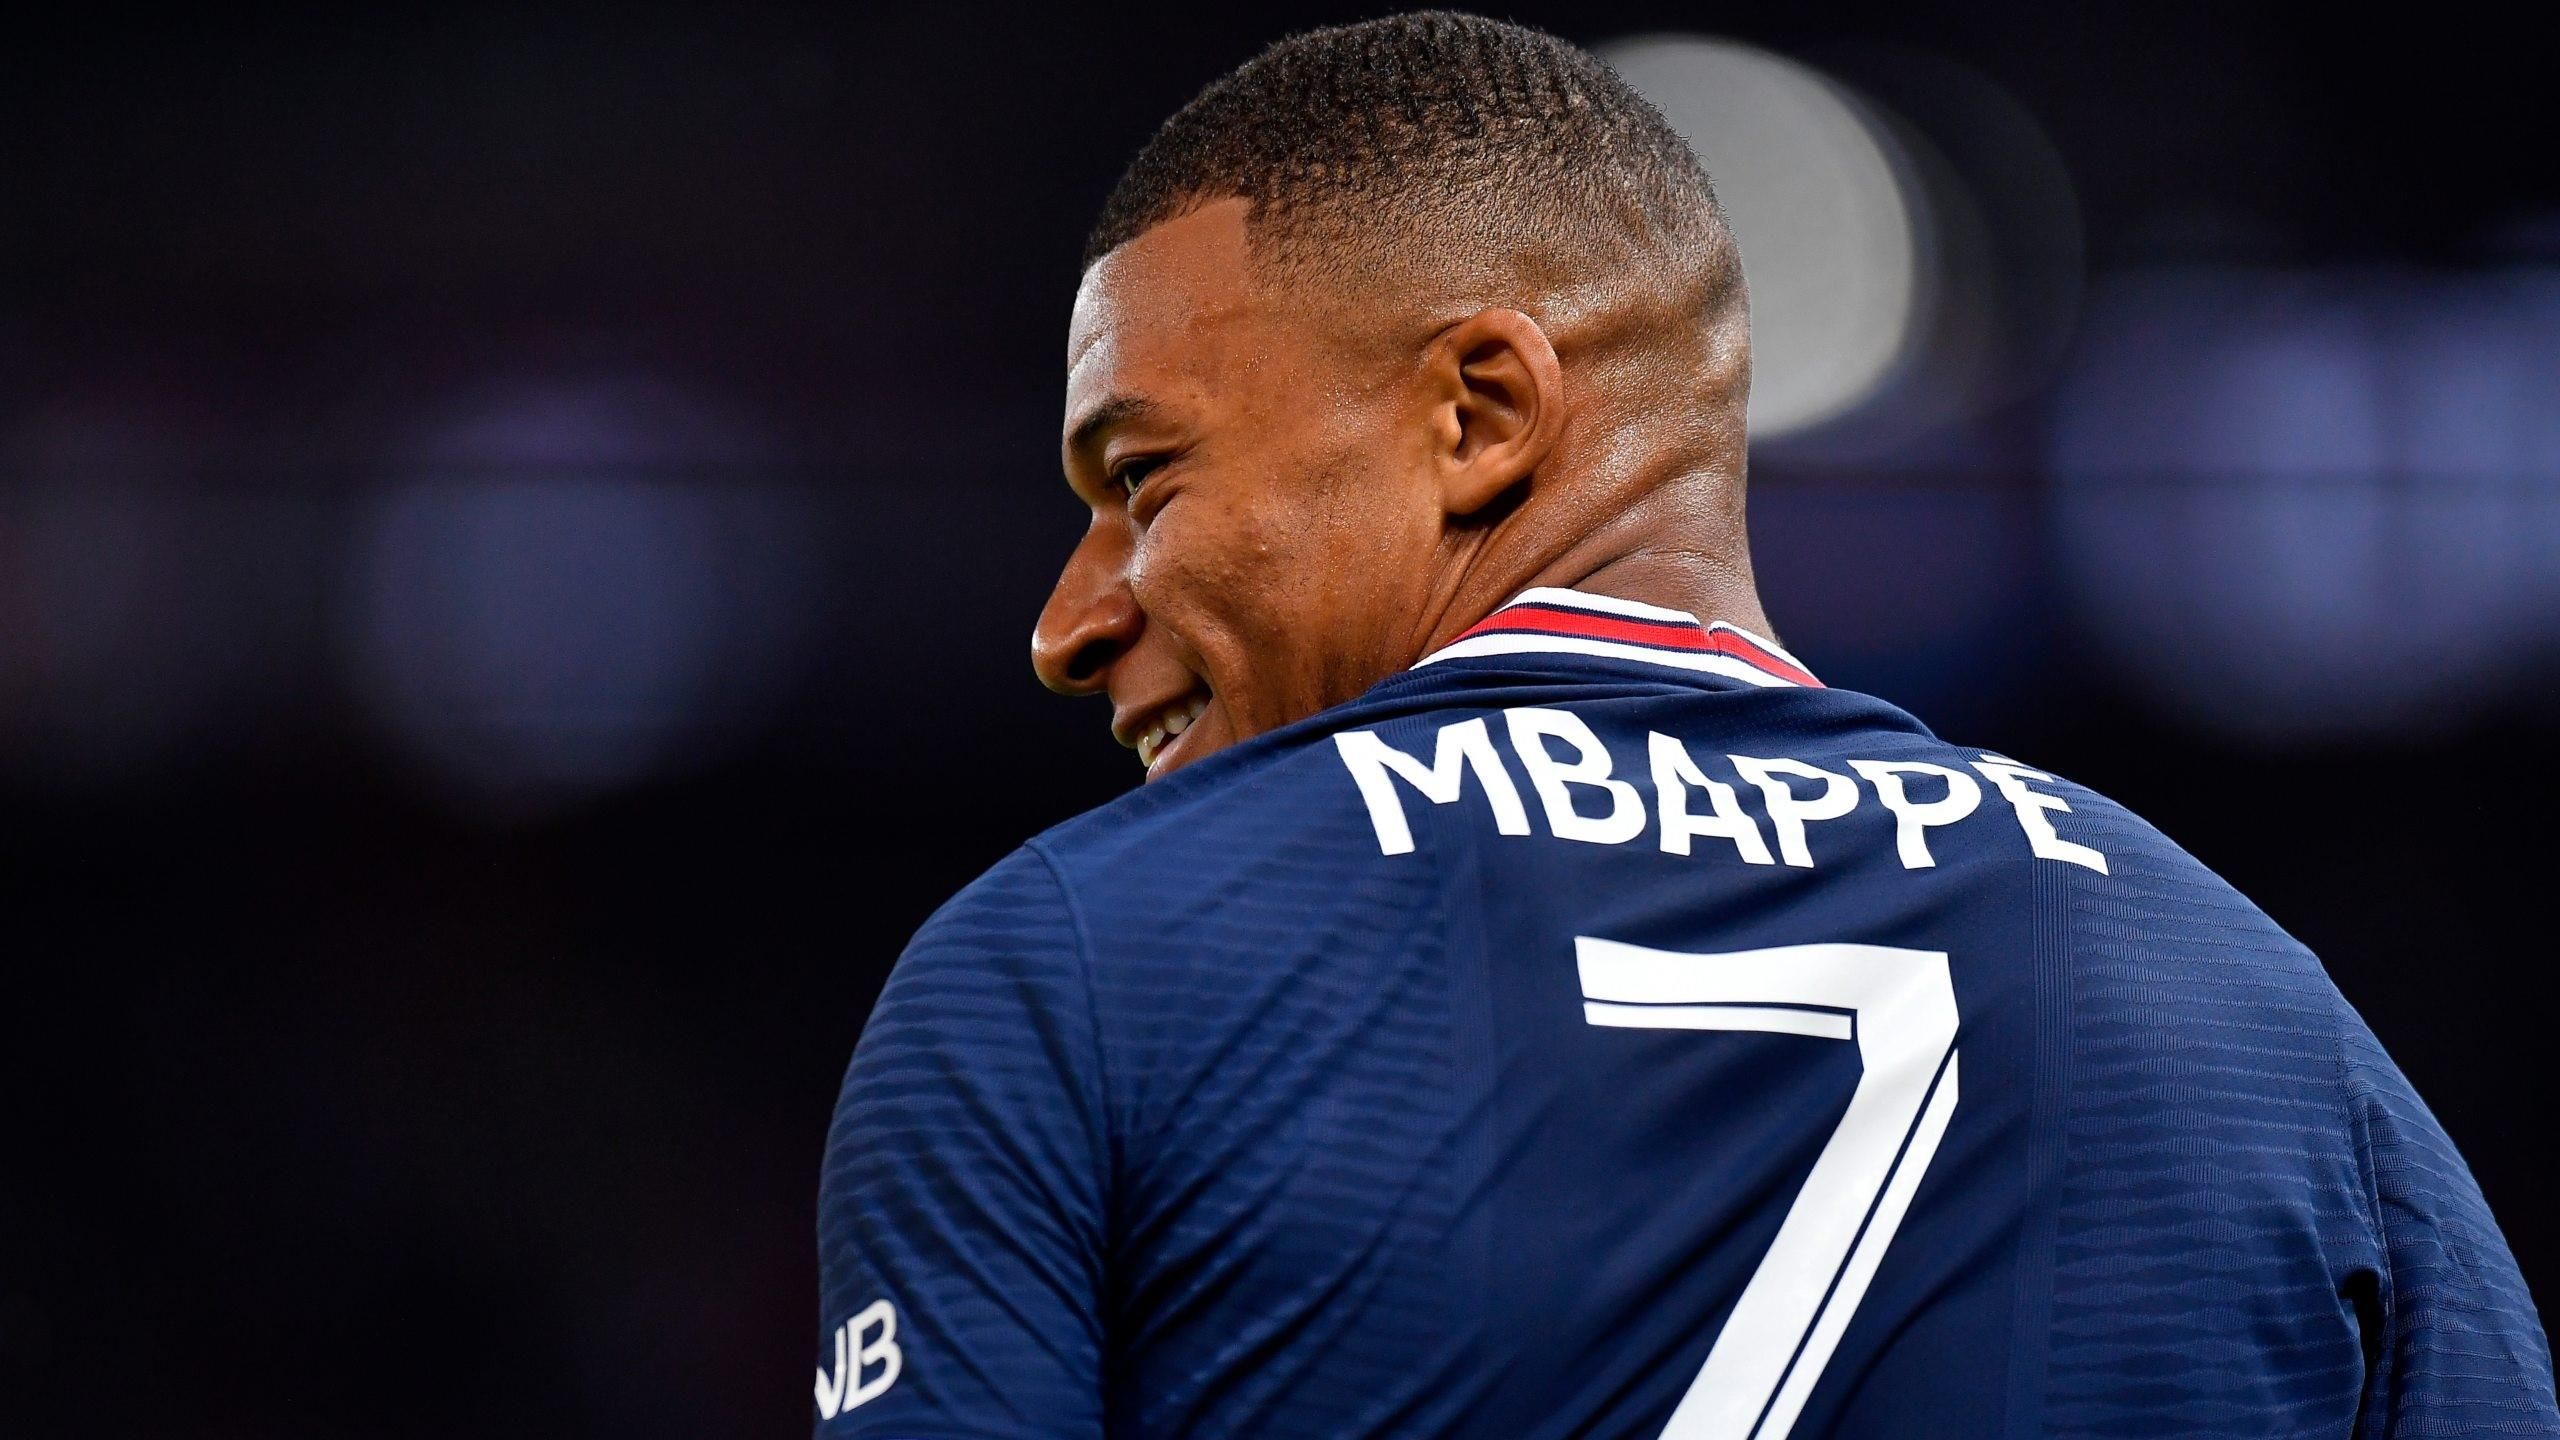 Transfer Update on Kylian Mbappe, Bellingham, Traore, Rice, Martial, Spence and other players